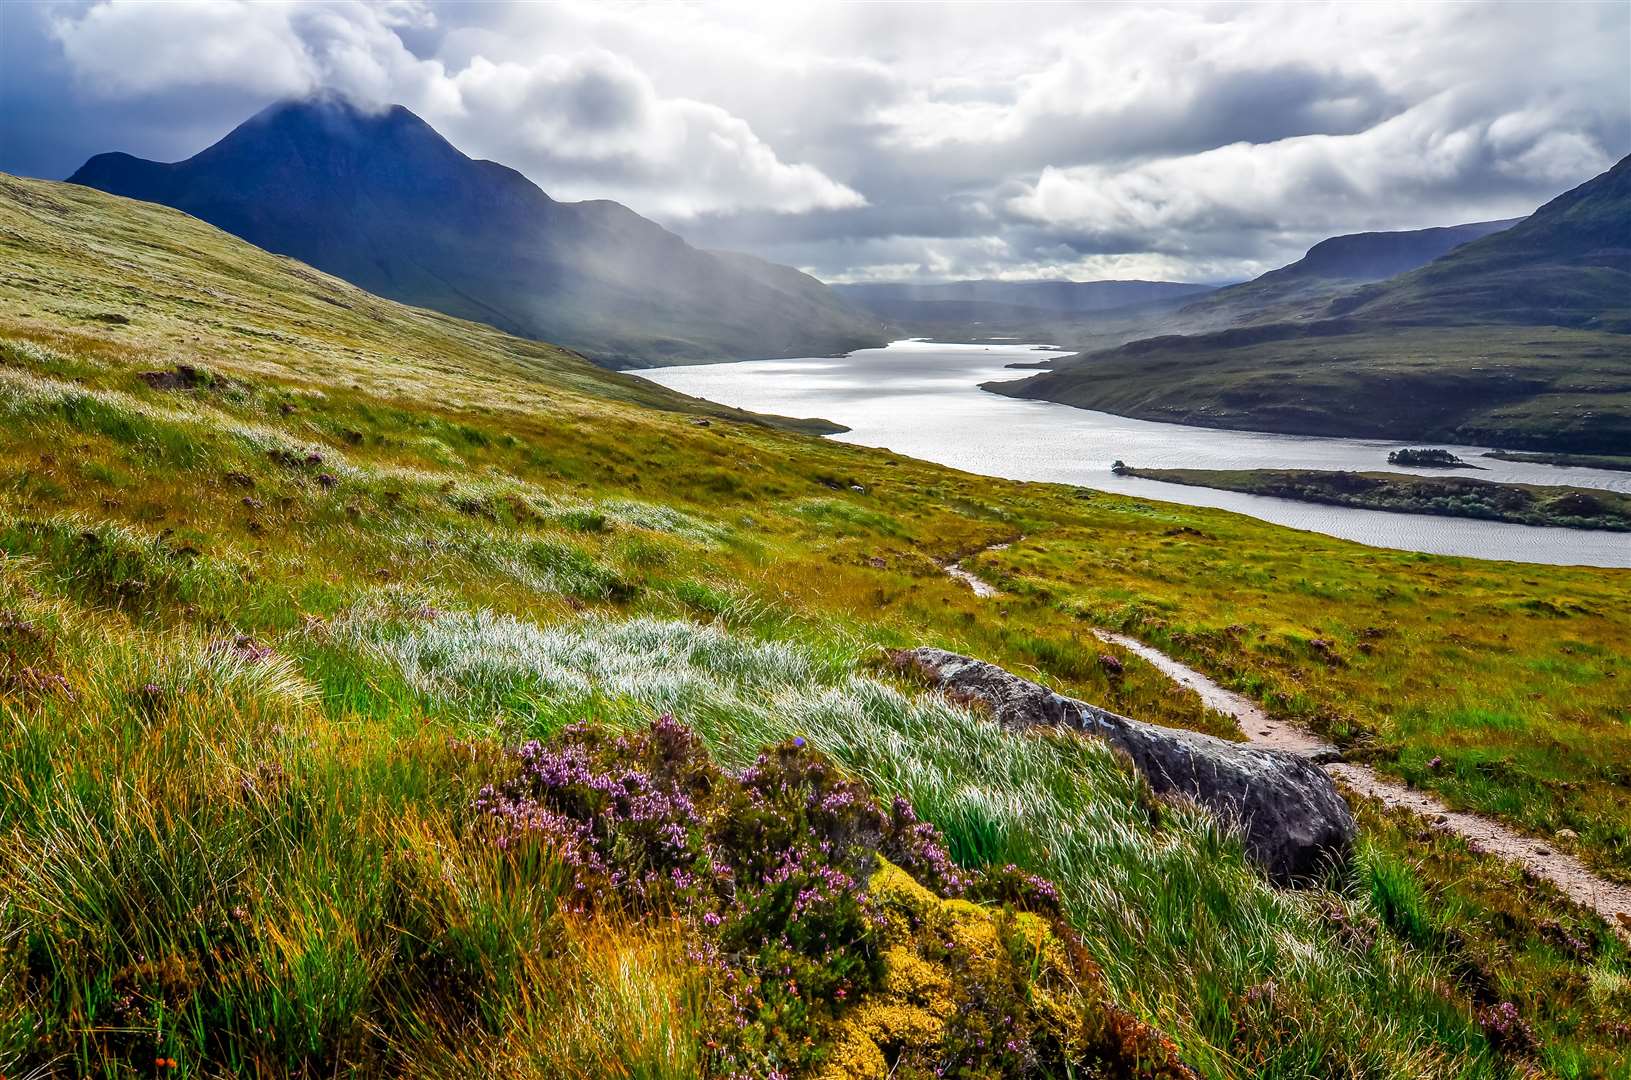 The special environment of the Highlands and Islands is world renowned.